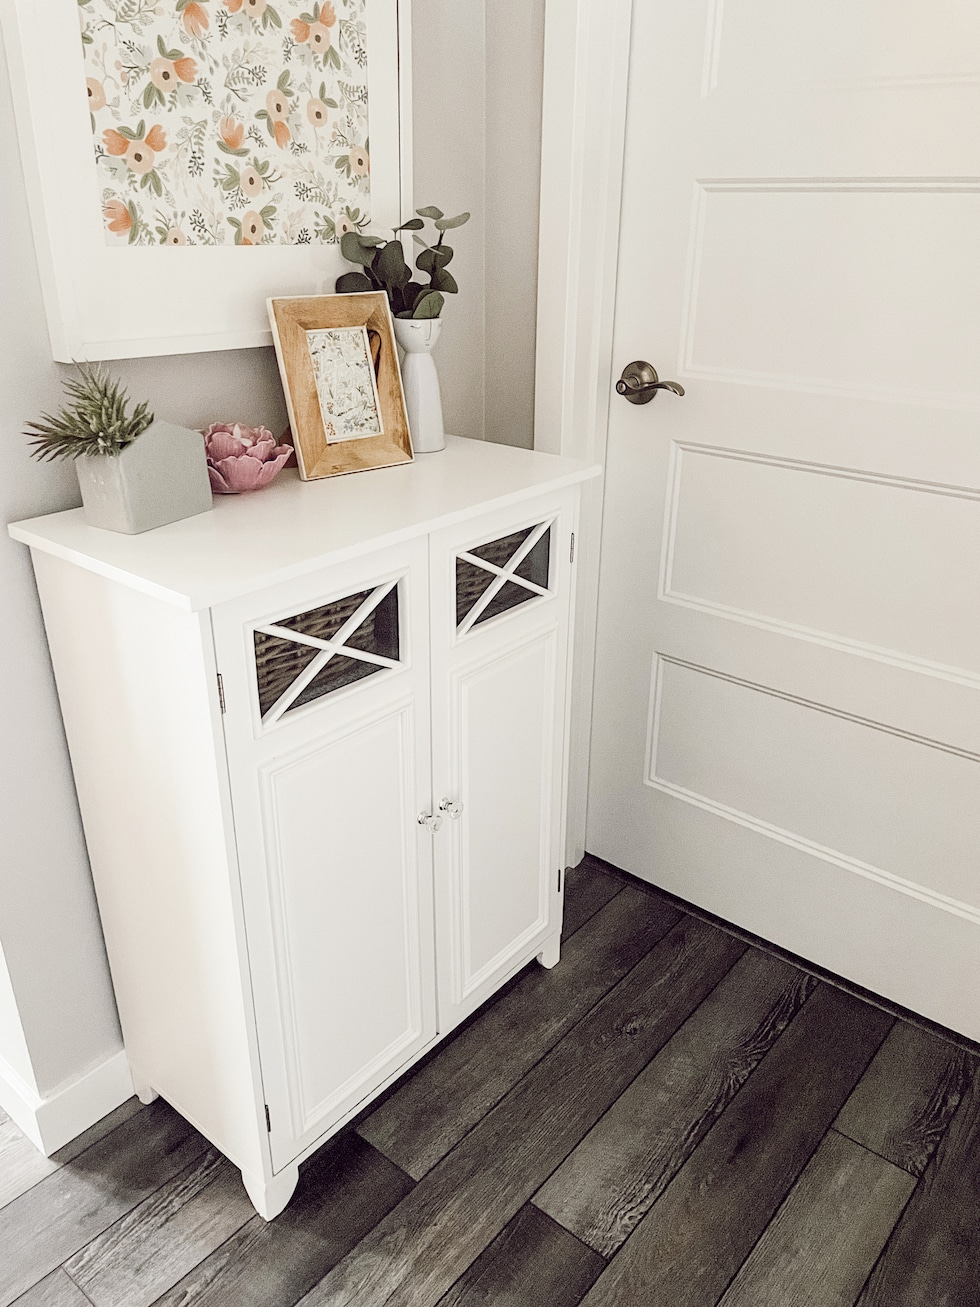 Small Accent Storage Cabinets, Consoles, Sideboards (Sources + Organizing Inspiration)